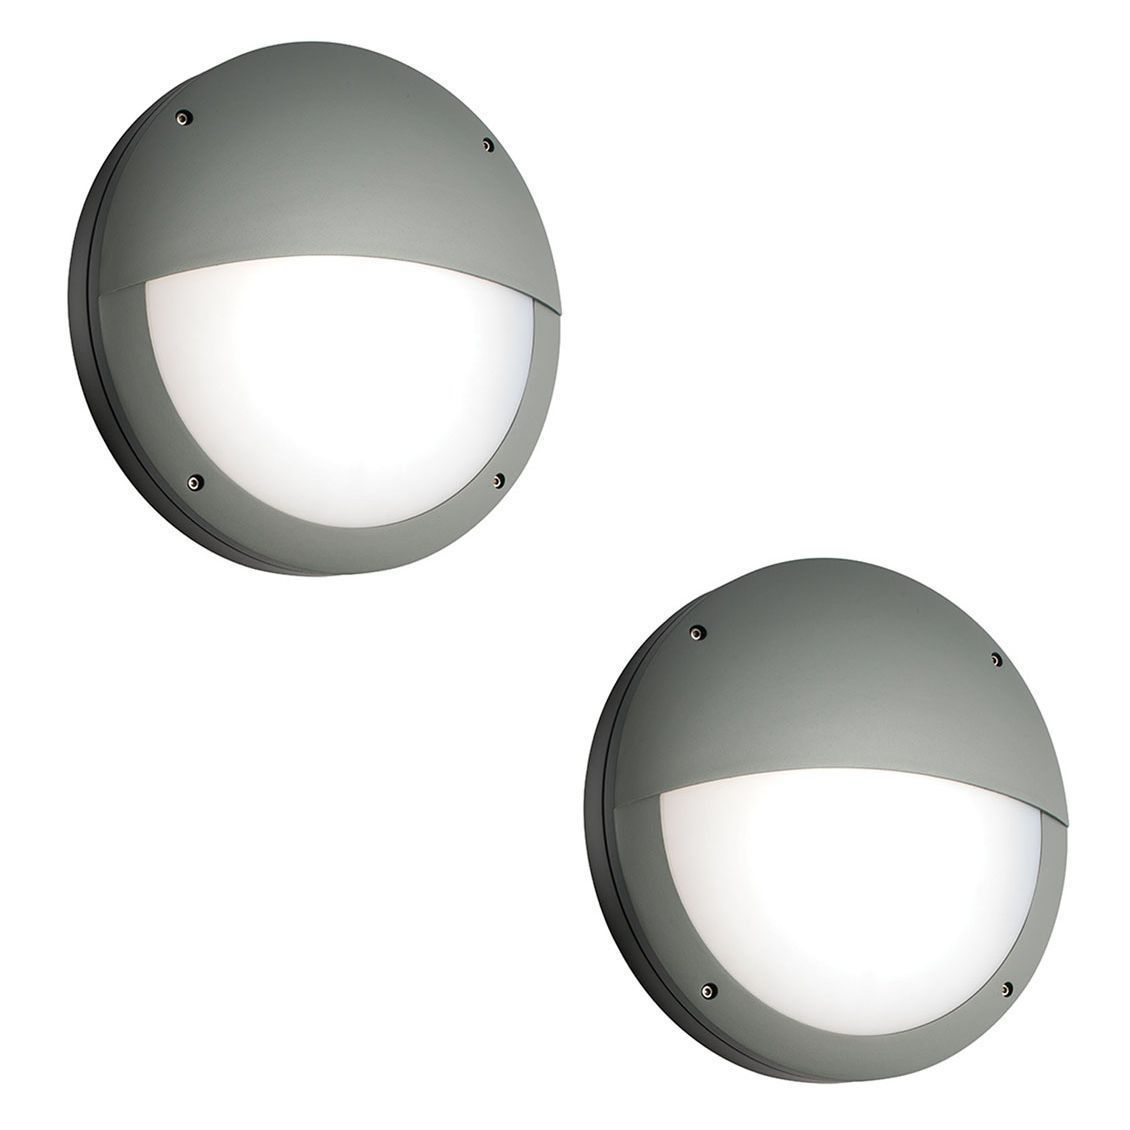 Pair Saxby 61754 Luik Eyelid Grey Aluminium Round Led Outdoor Wall Light With Regard To Led Outdoor Wall Lighting (View 13 of 15)